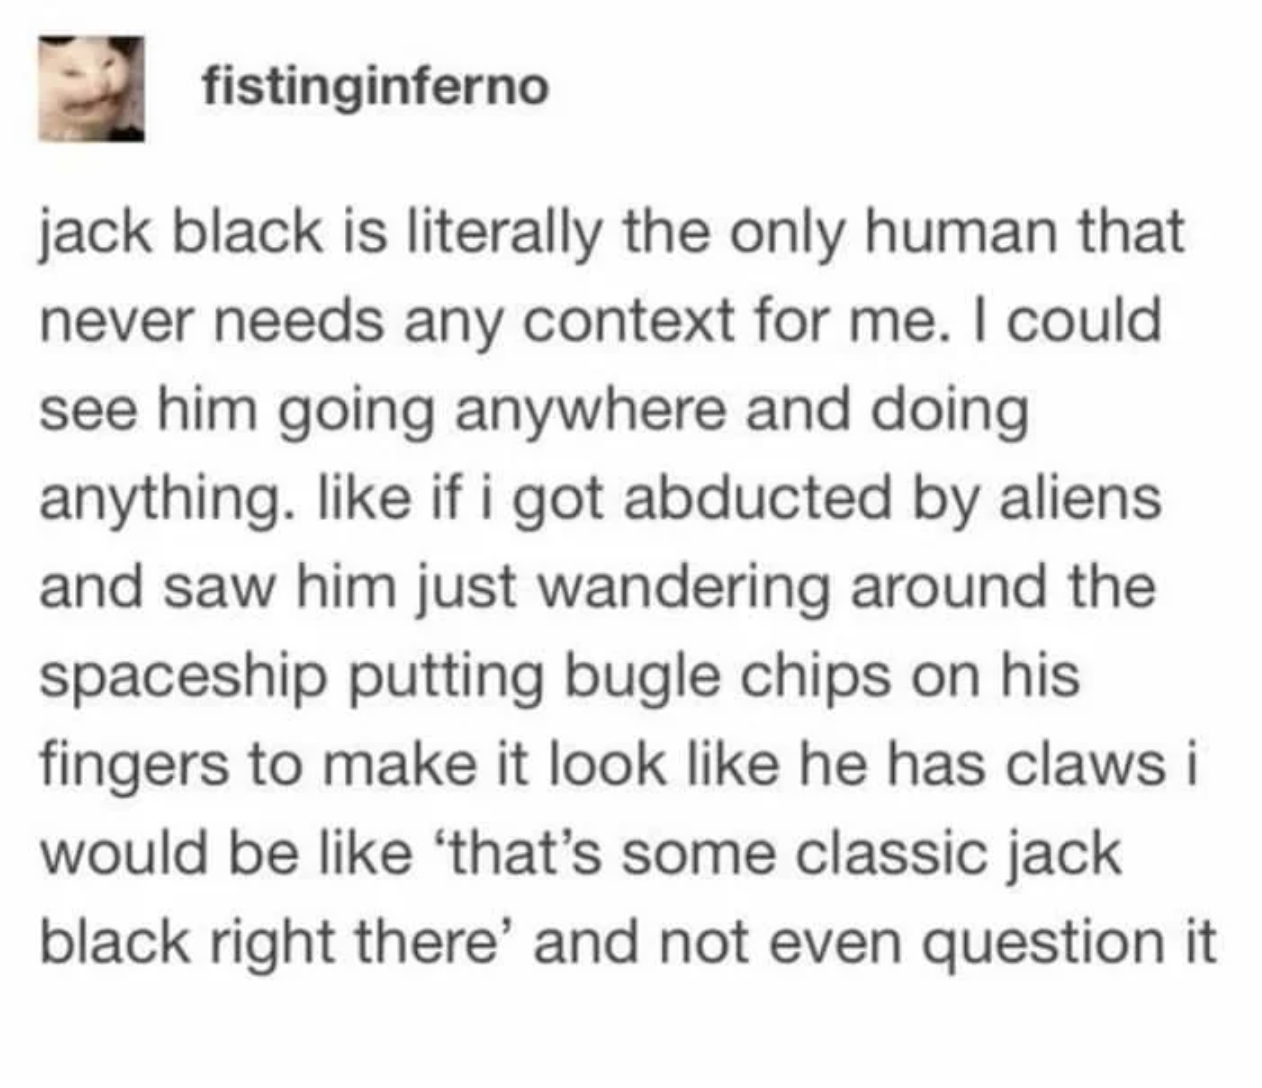 jack black is the one person who never needs any context - fistinginferno jack black is literally the only human that never needs any context for me. I could see him going anywhere and doing anything. if i got abducted by aliens and saw him just wandering